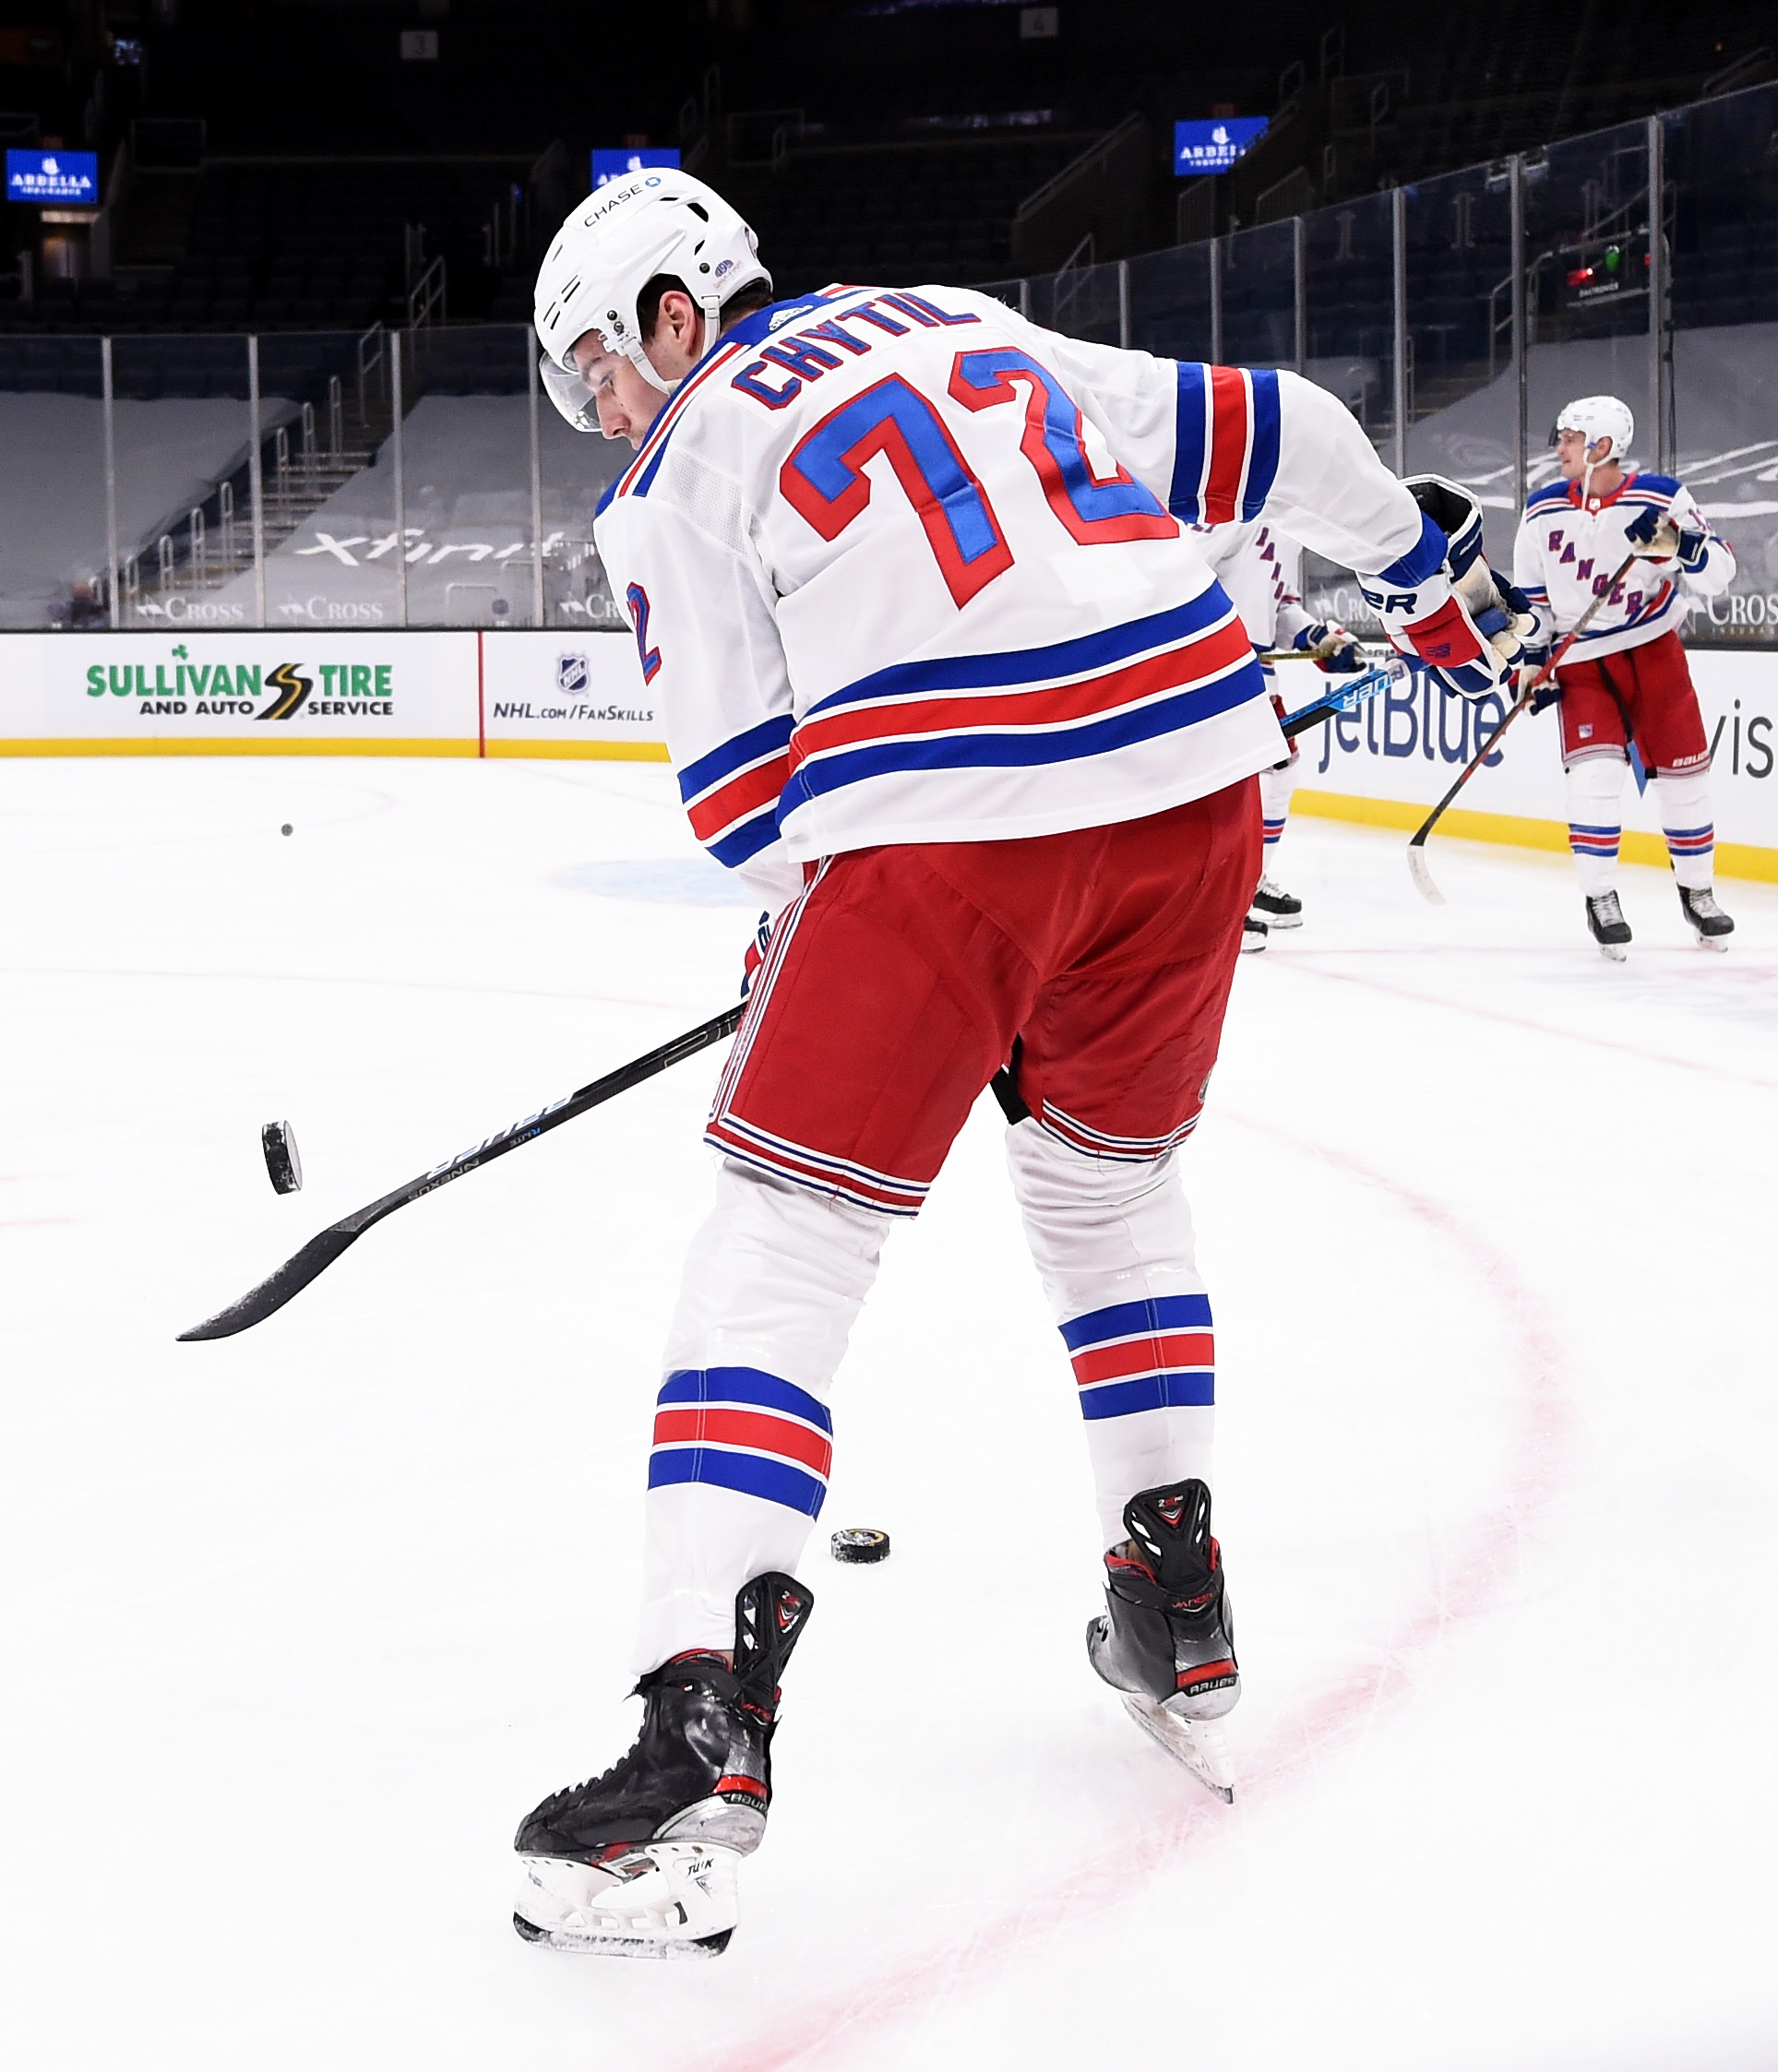 Rangers sign Filip Chytil to four-year contract extension